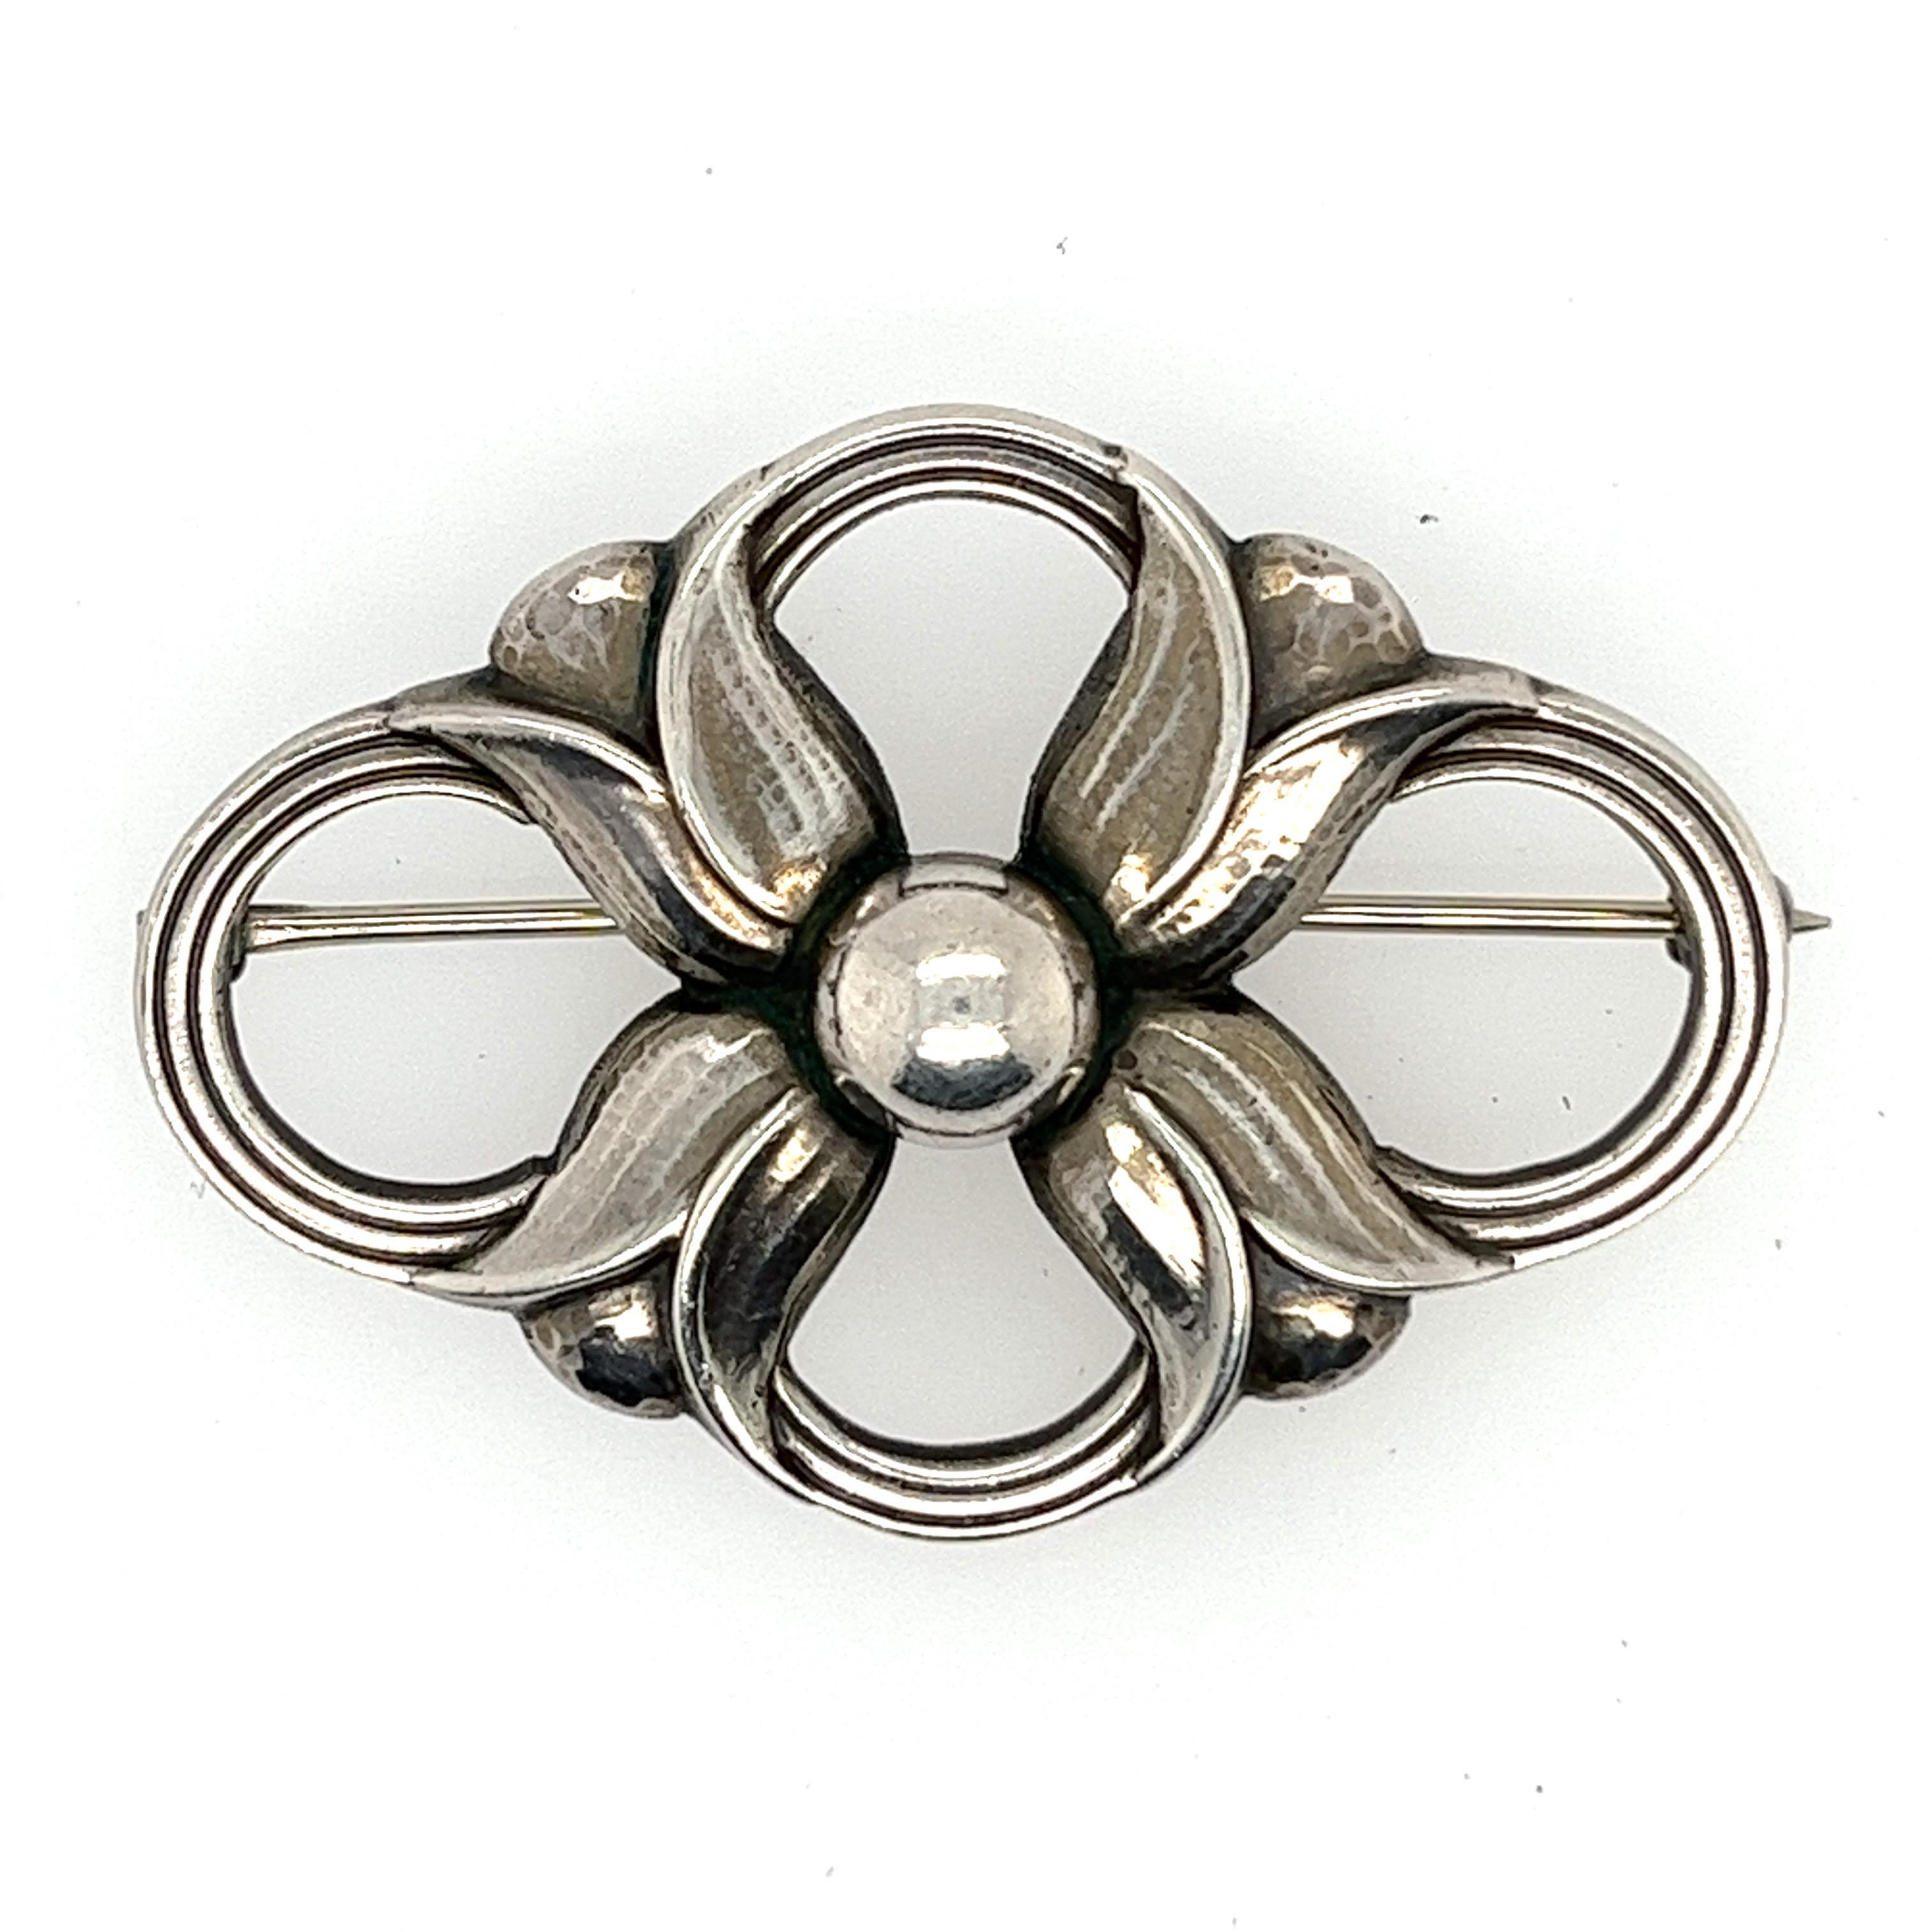 Georg Jensen was a danish silversmith and designer, he achieved international prominence for his commercial application of modern metal design. This beautiful brooch is a unique piece from this artist. Crafted of sterling silver with an intricate